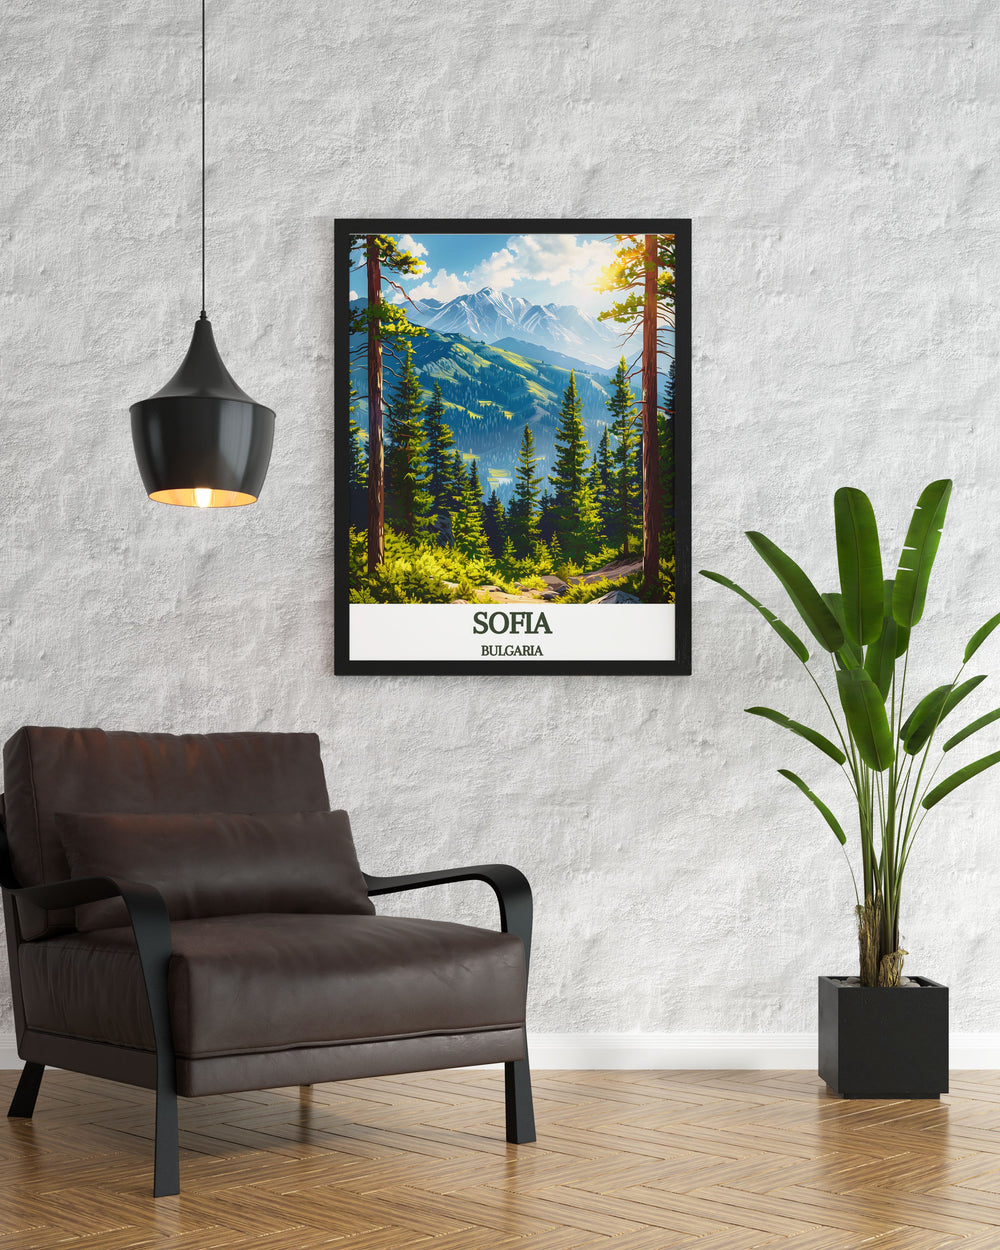 Beautiful Bulgaria Poster of BULGARIA Vitosha mountain a captivating art print that adds elegance and natural splendor to any room an ideal piece for wall art enthusiasts.